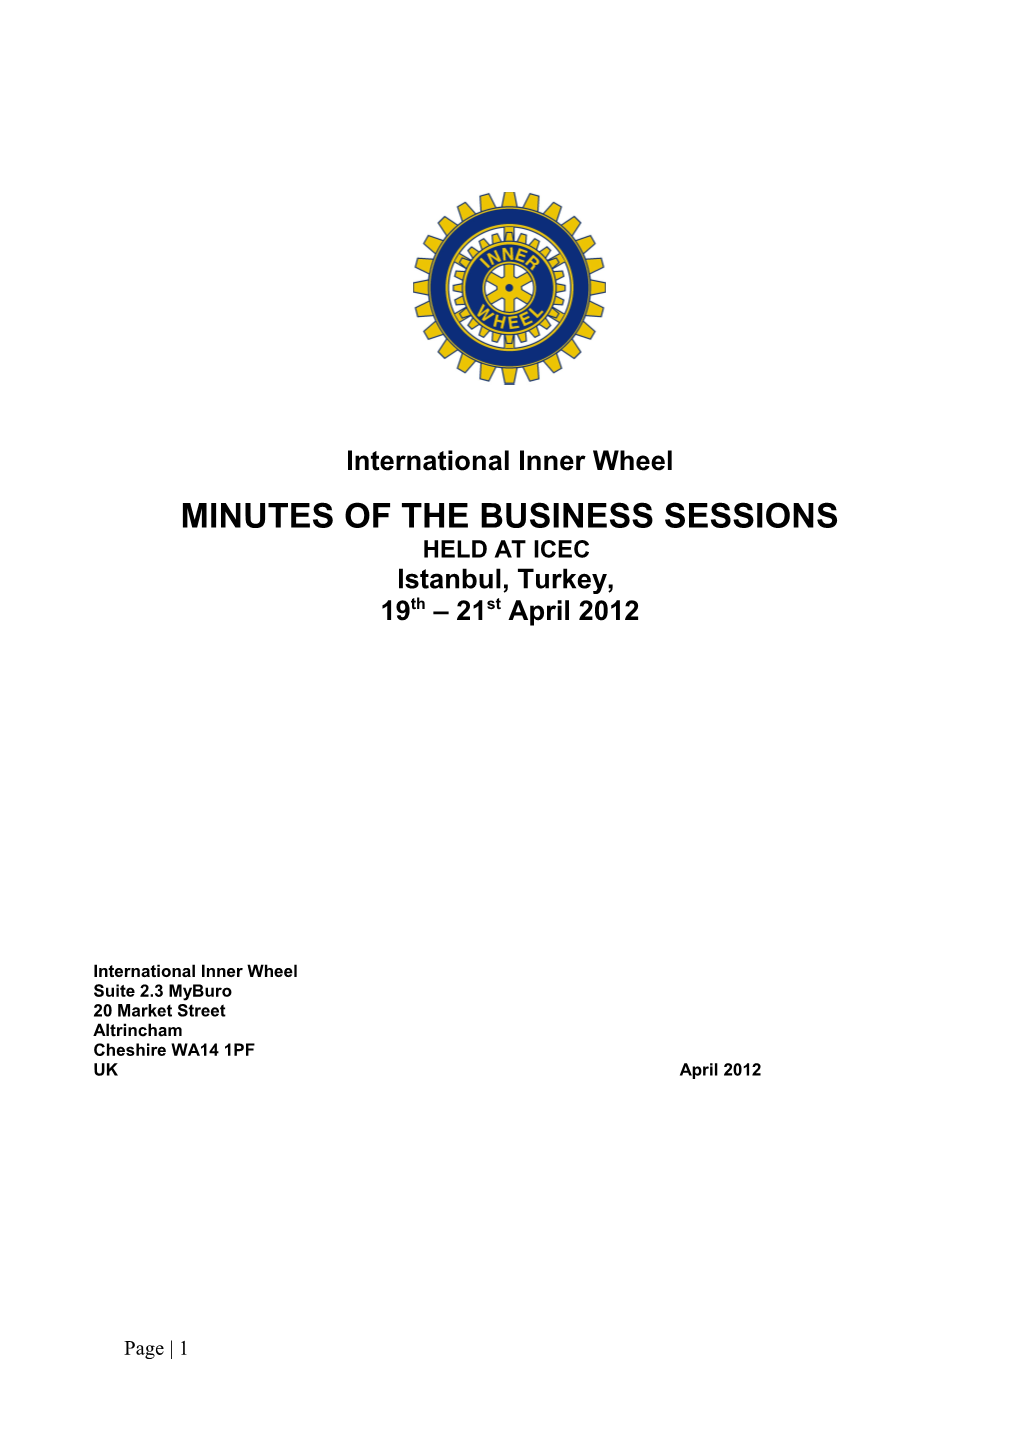 Minutes of the Business Sessions